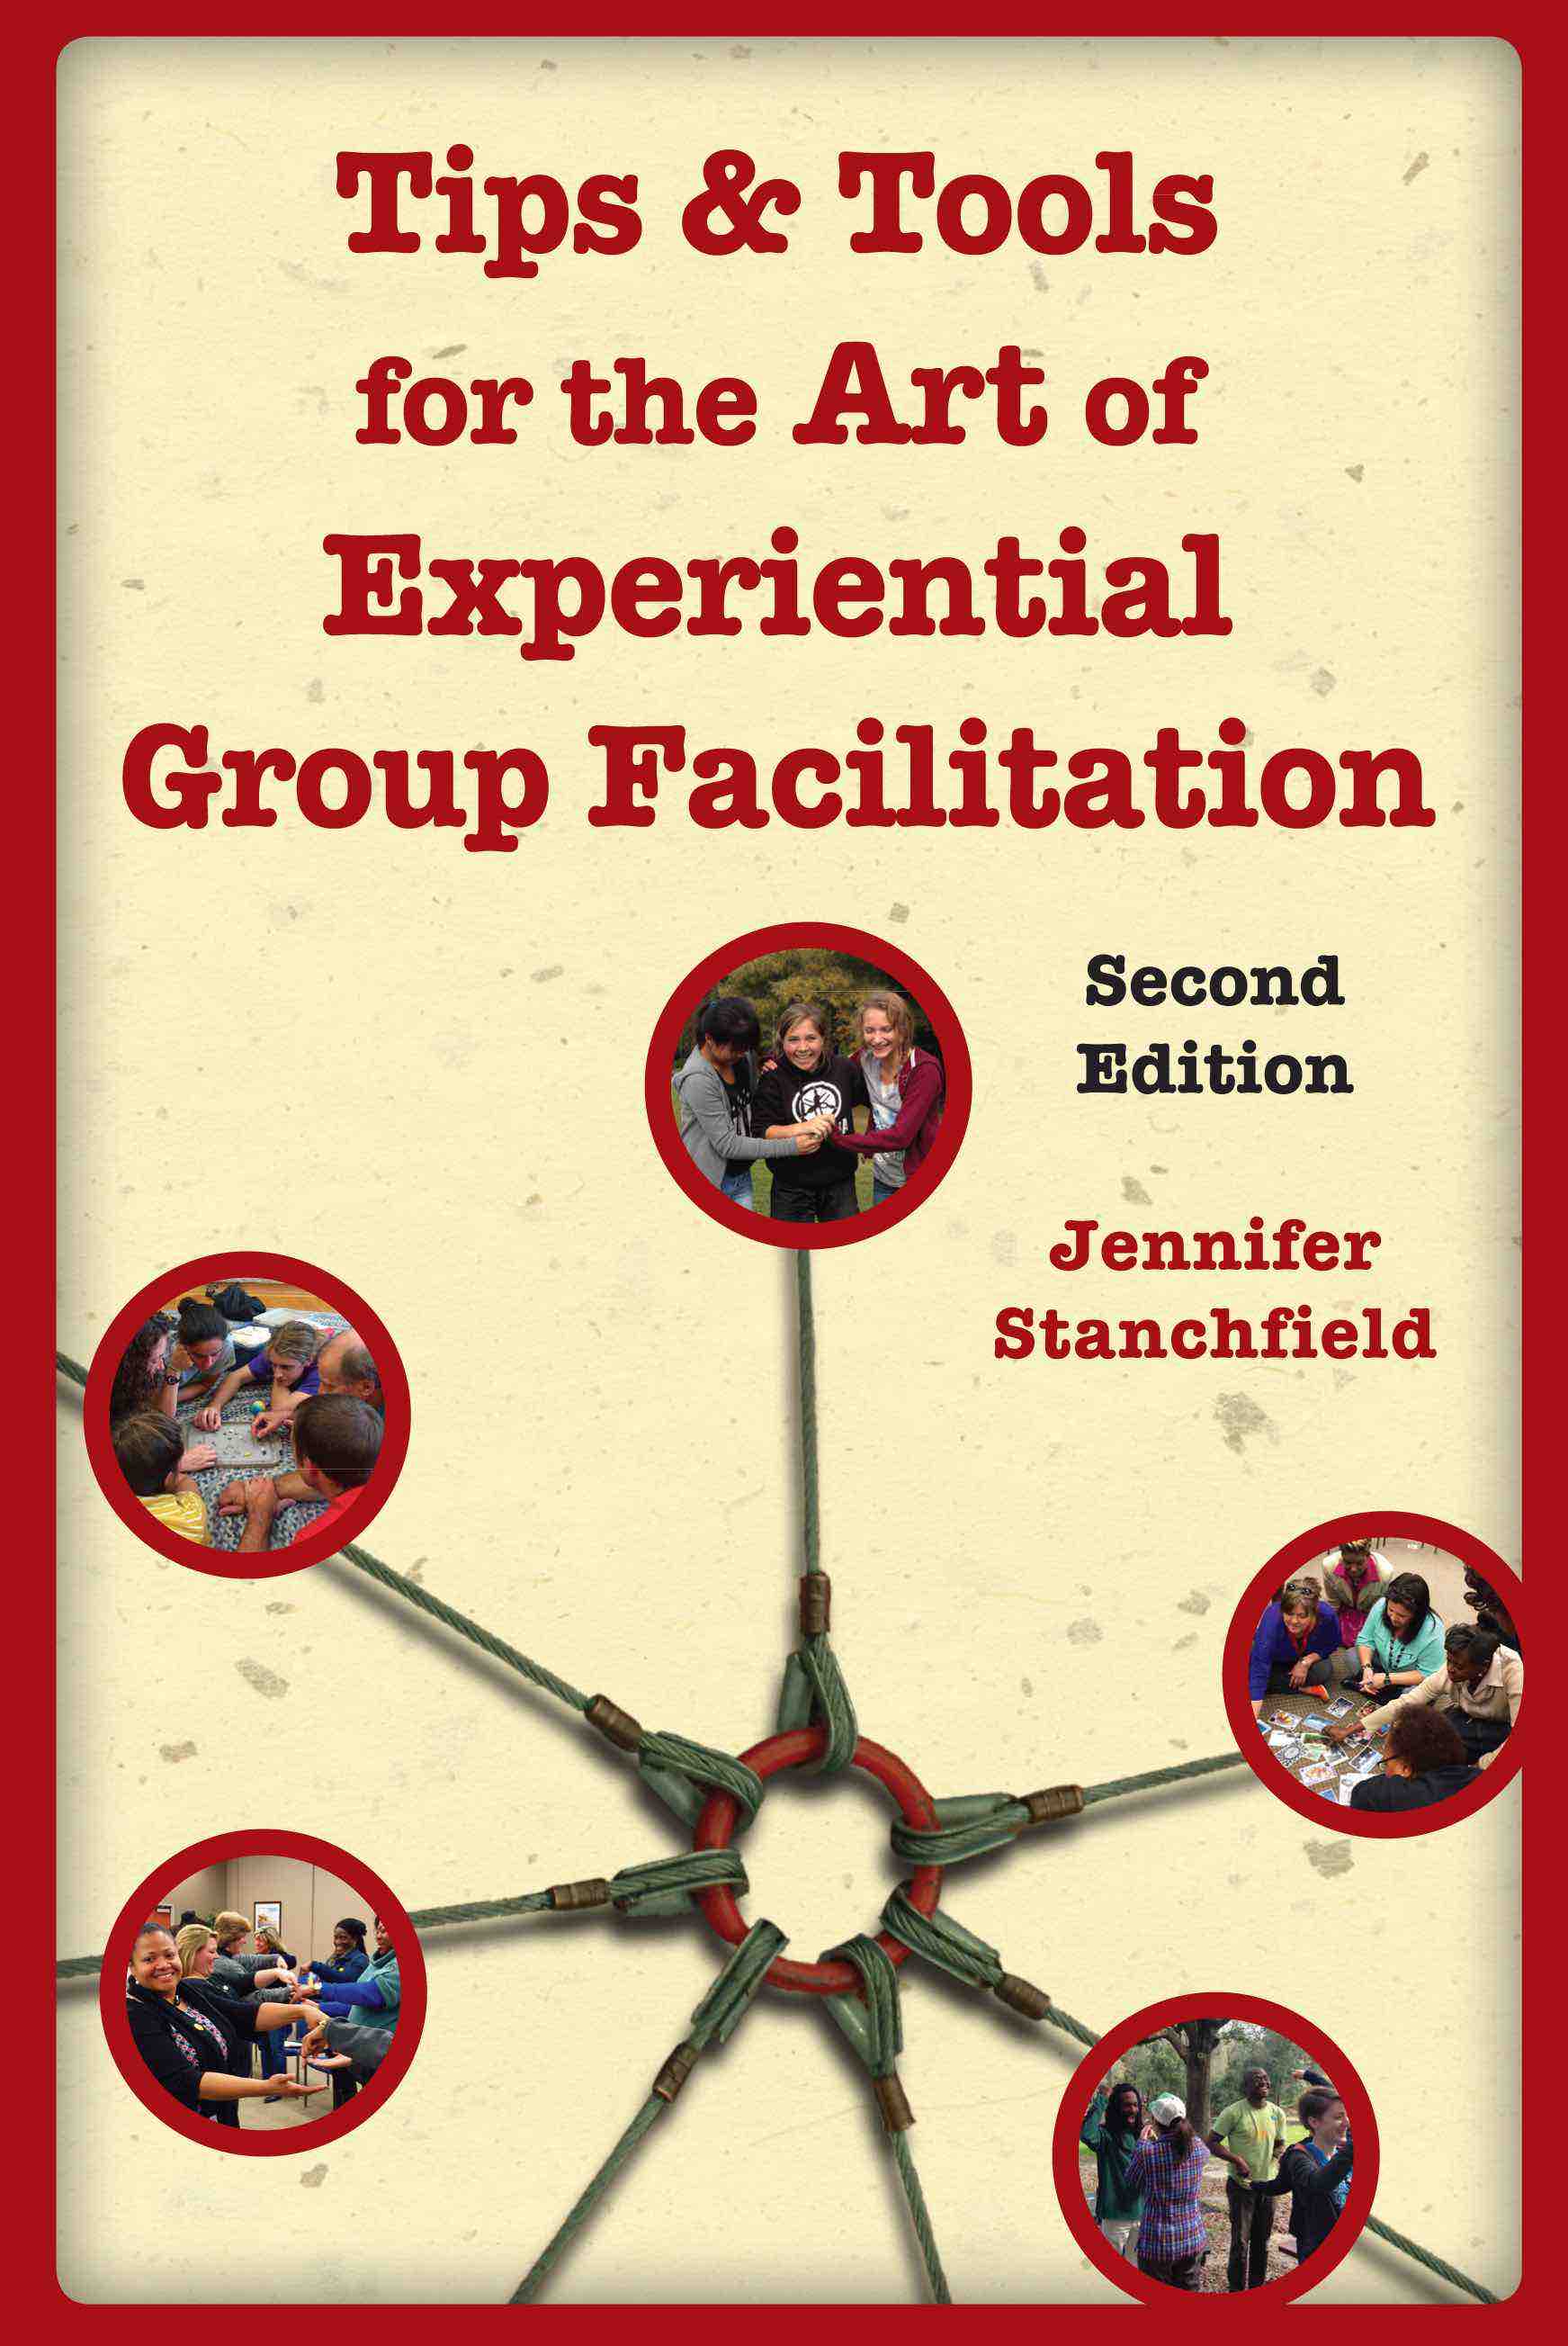 The Art of Experiential Group Facilitation Workshop